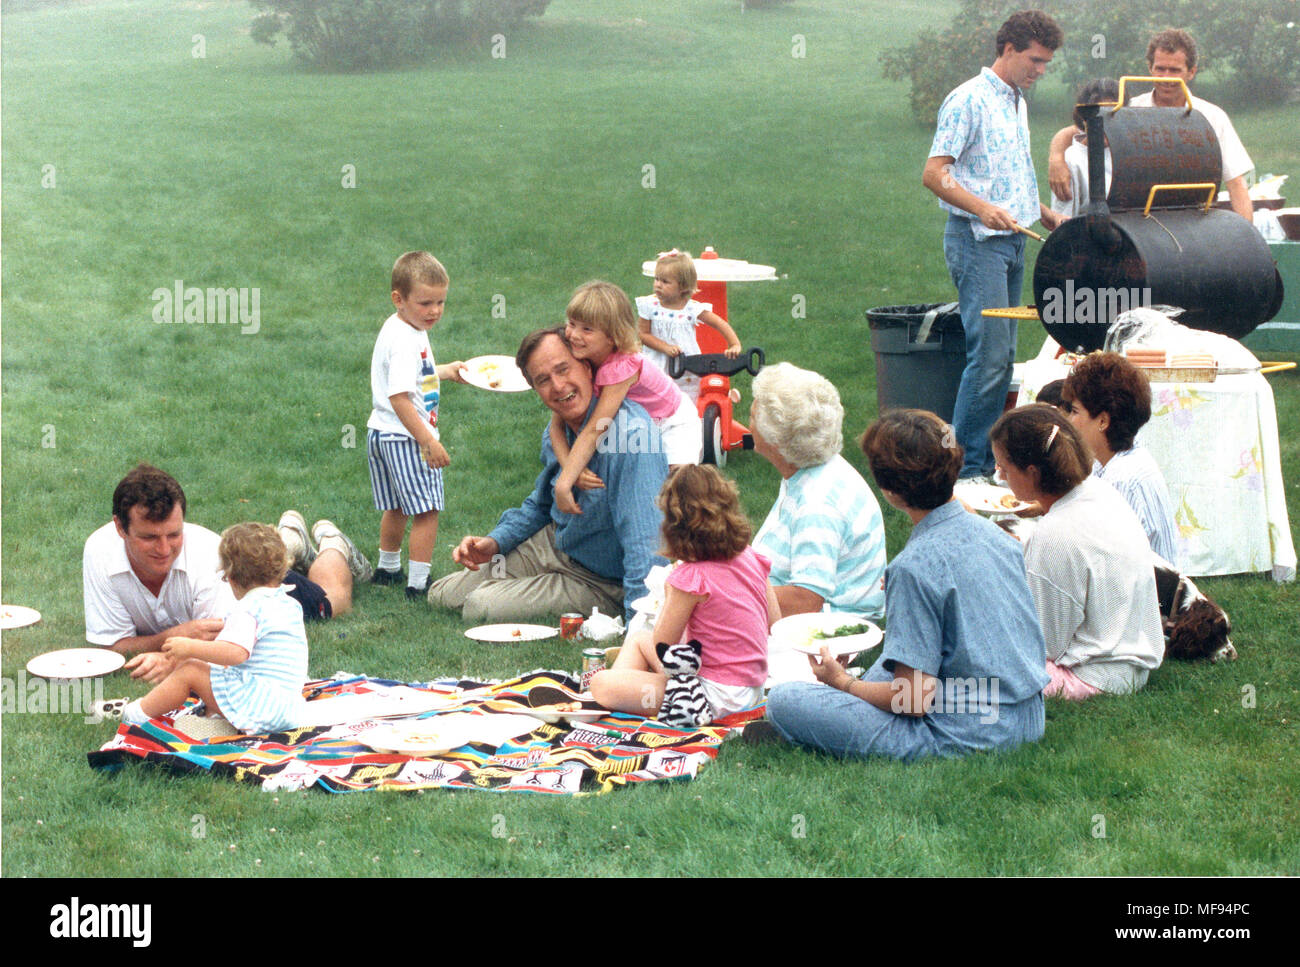 Kennebunkport, Maine, USA. 7th Aug, 1988. United States Vice President GEORGE H.W. BUSH is surrounded by his children and grandchildren at the family home in Kennebunkport, Maine in 1988. Future United States President George W. Bush is at the upper right corner of the photo. Credit: White House/CNP/ZUMAPRESS.com/Alamy Live News Stock Photo